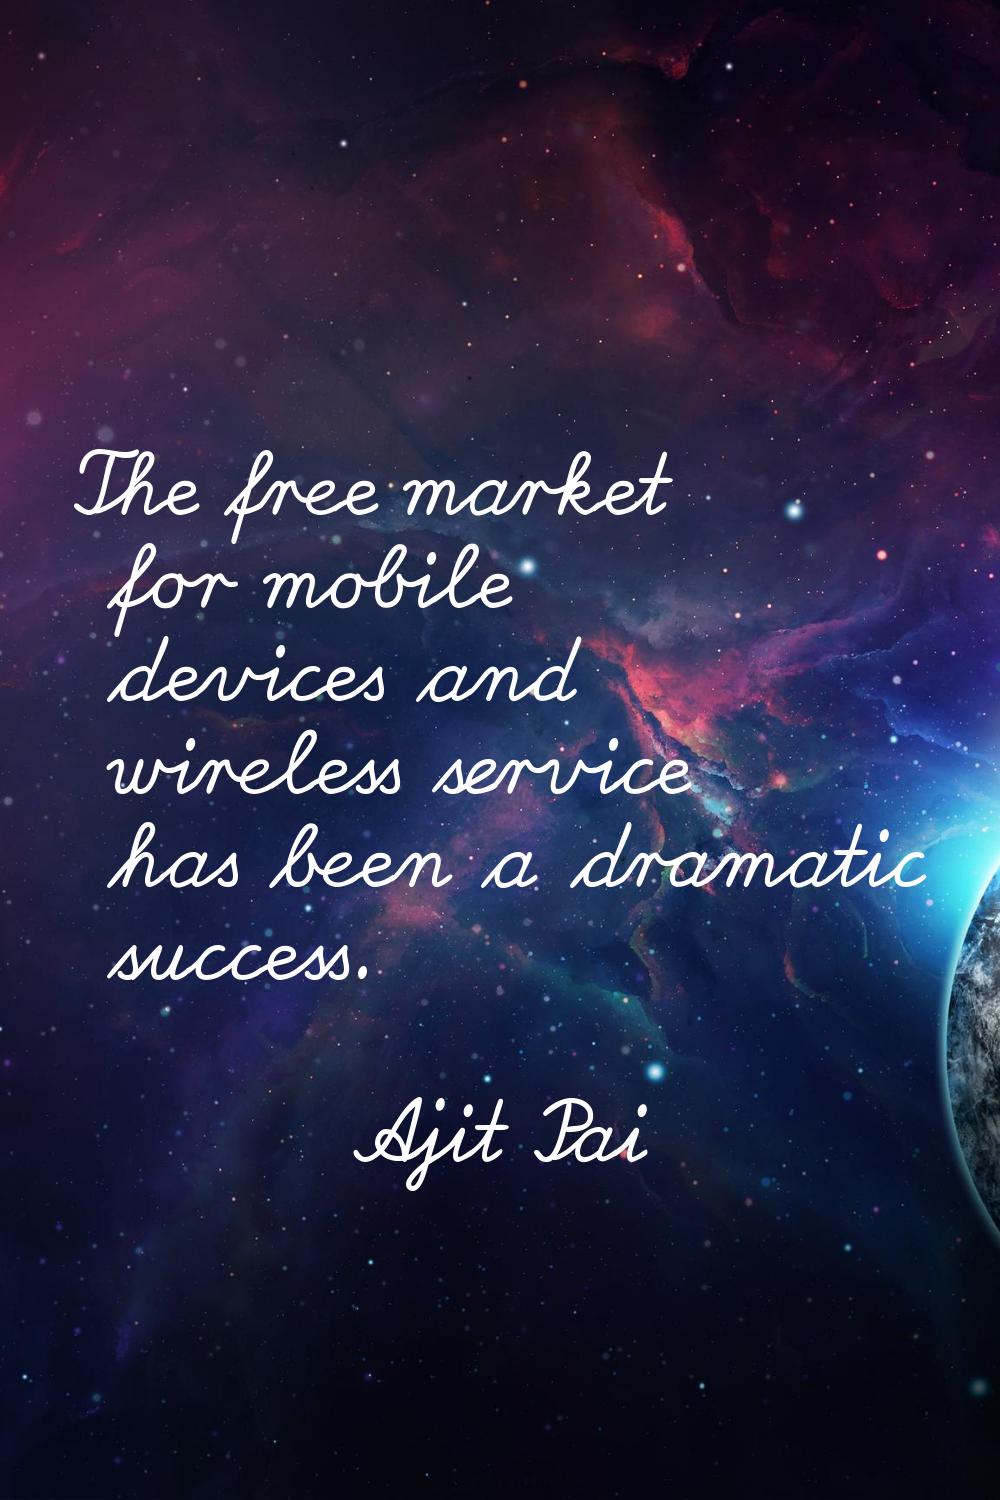 The free market for mobile devices and wireless service has been a dramatic success.